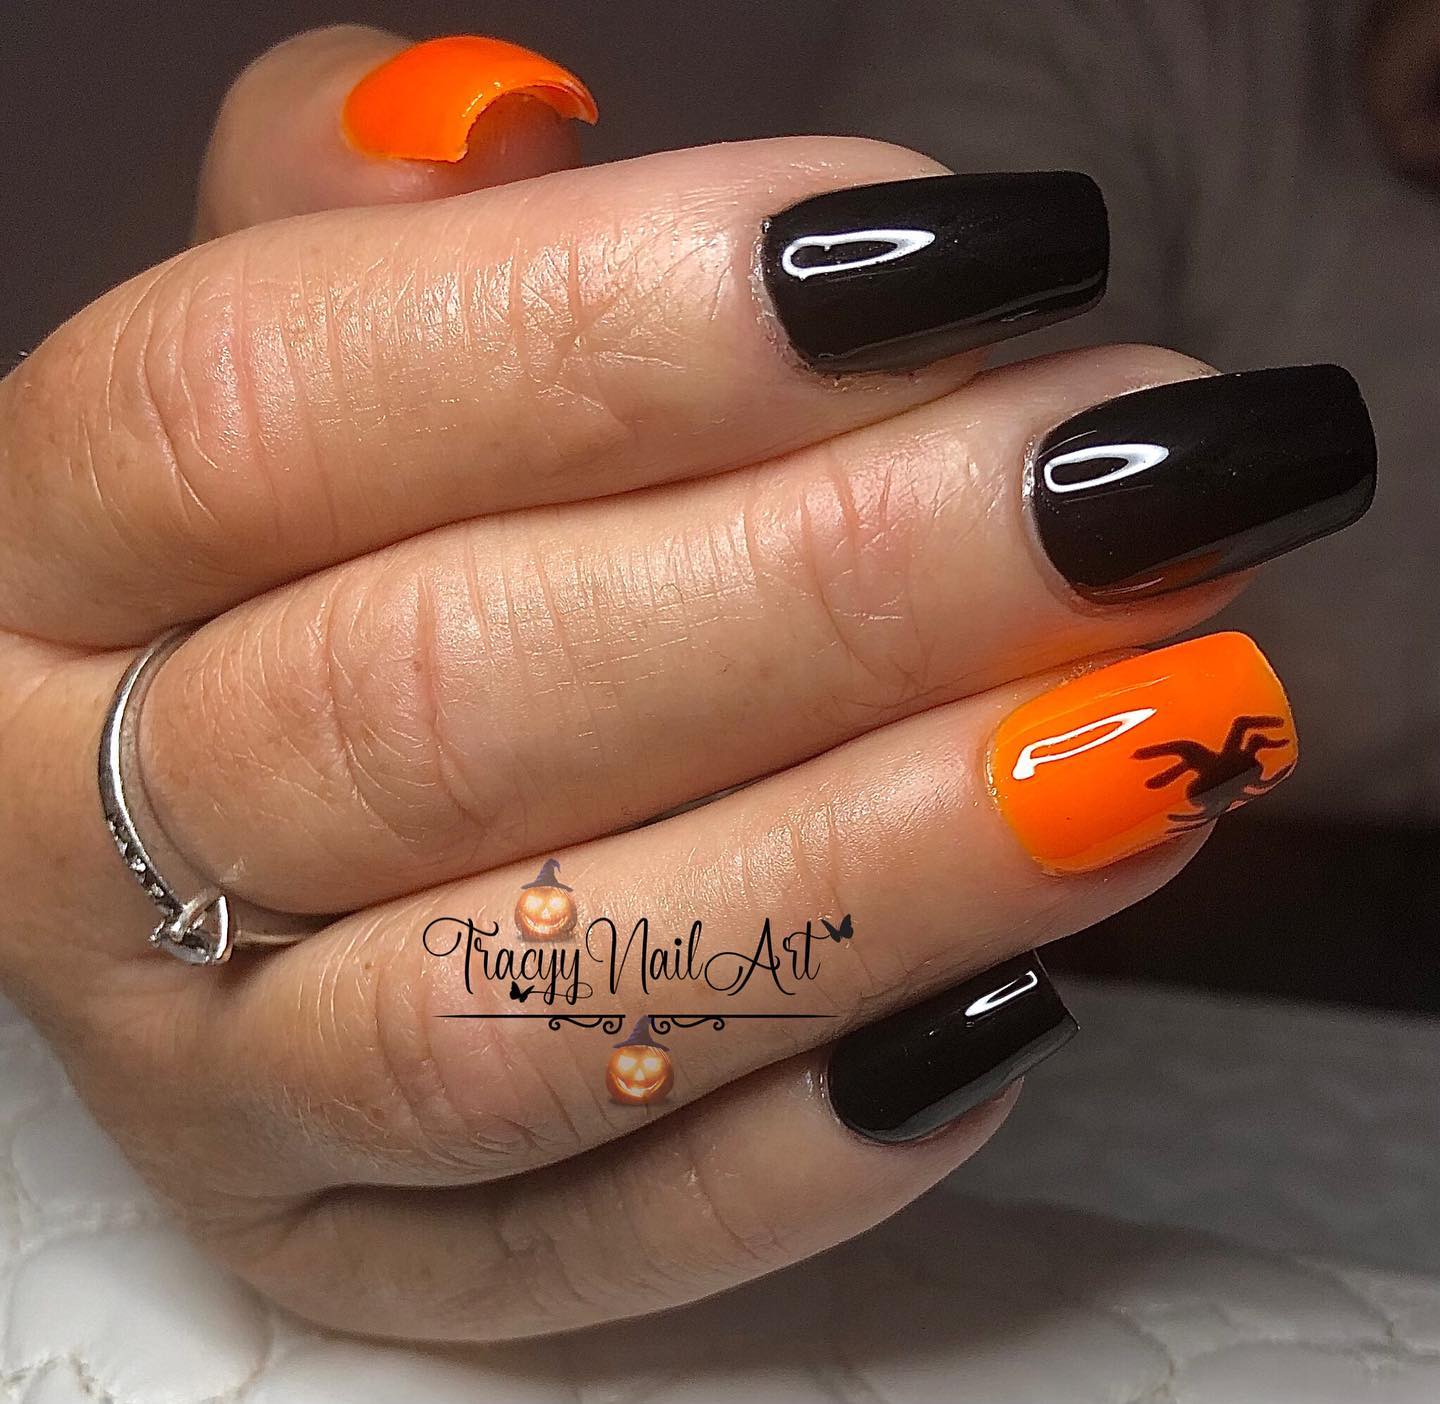 Here is a great Halloween inspired nails to adore! Applying neon orange nail polish for your accent nails and drawing a small spider near the tips are a great way to show off your style!